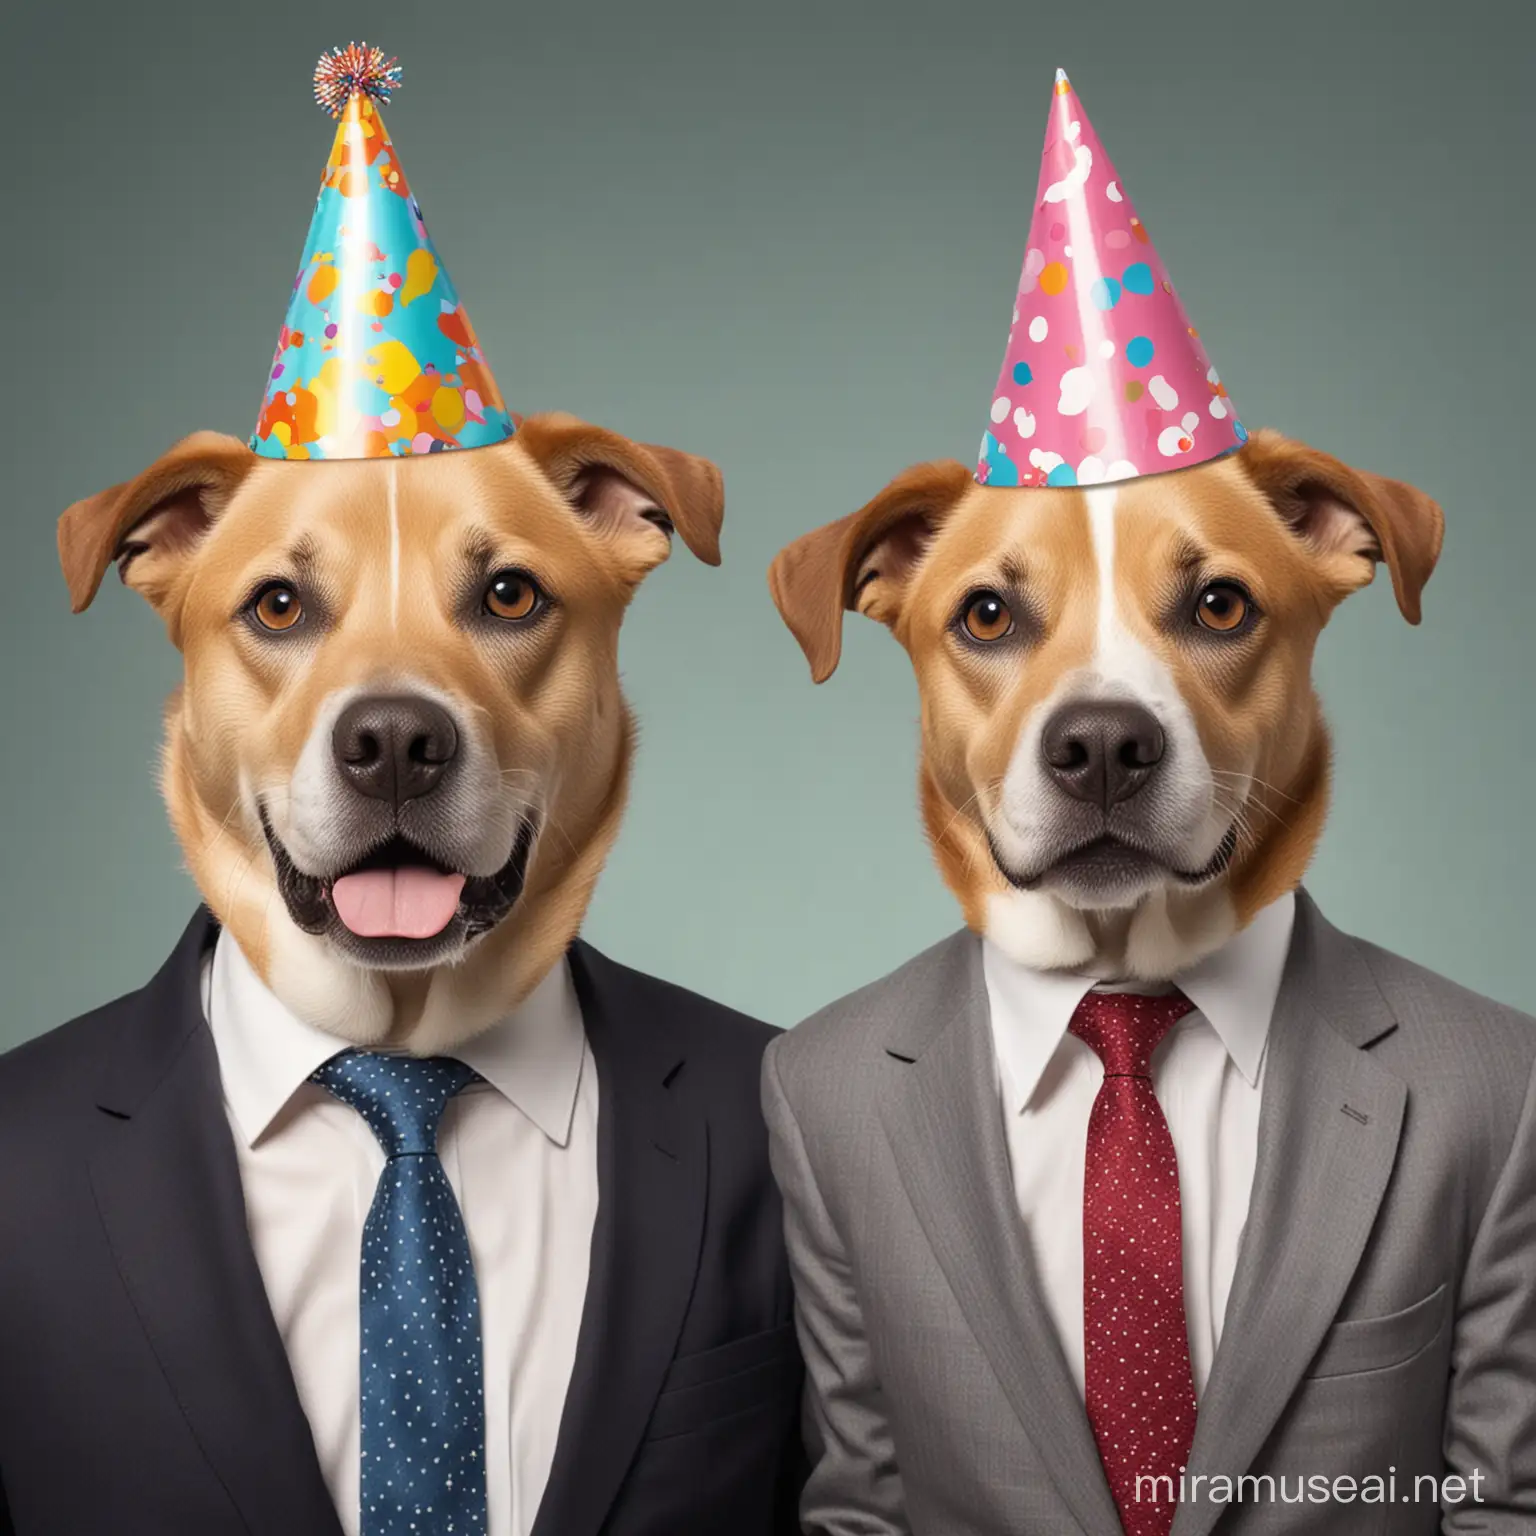 Generate an image with two dogs with suits celebrating. Include a party hat. 